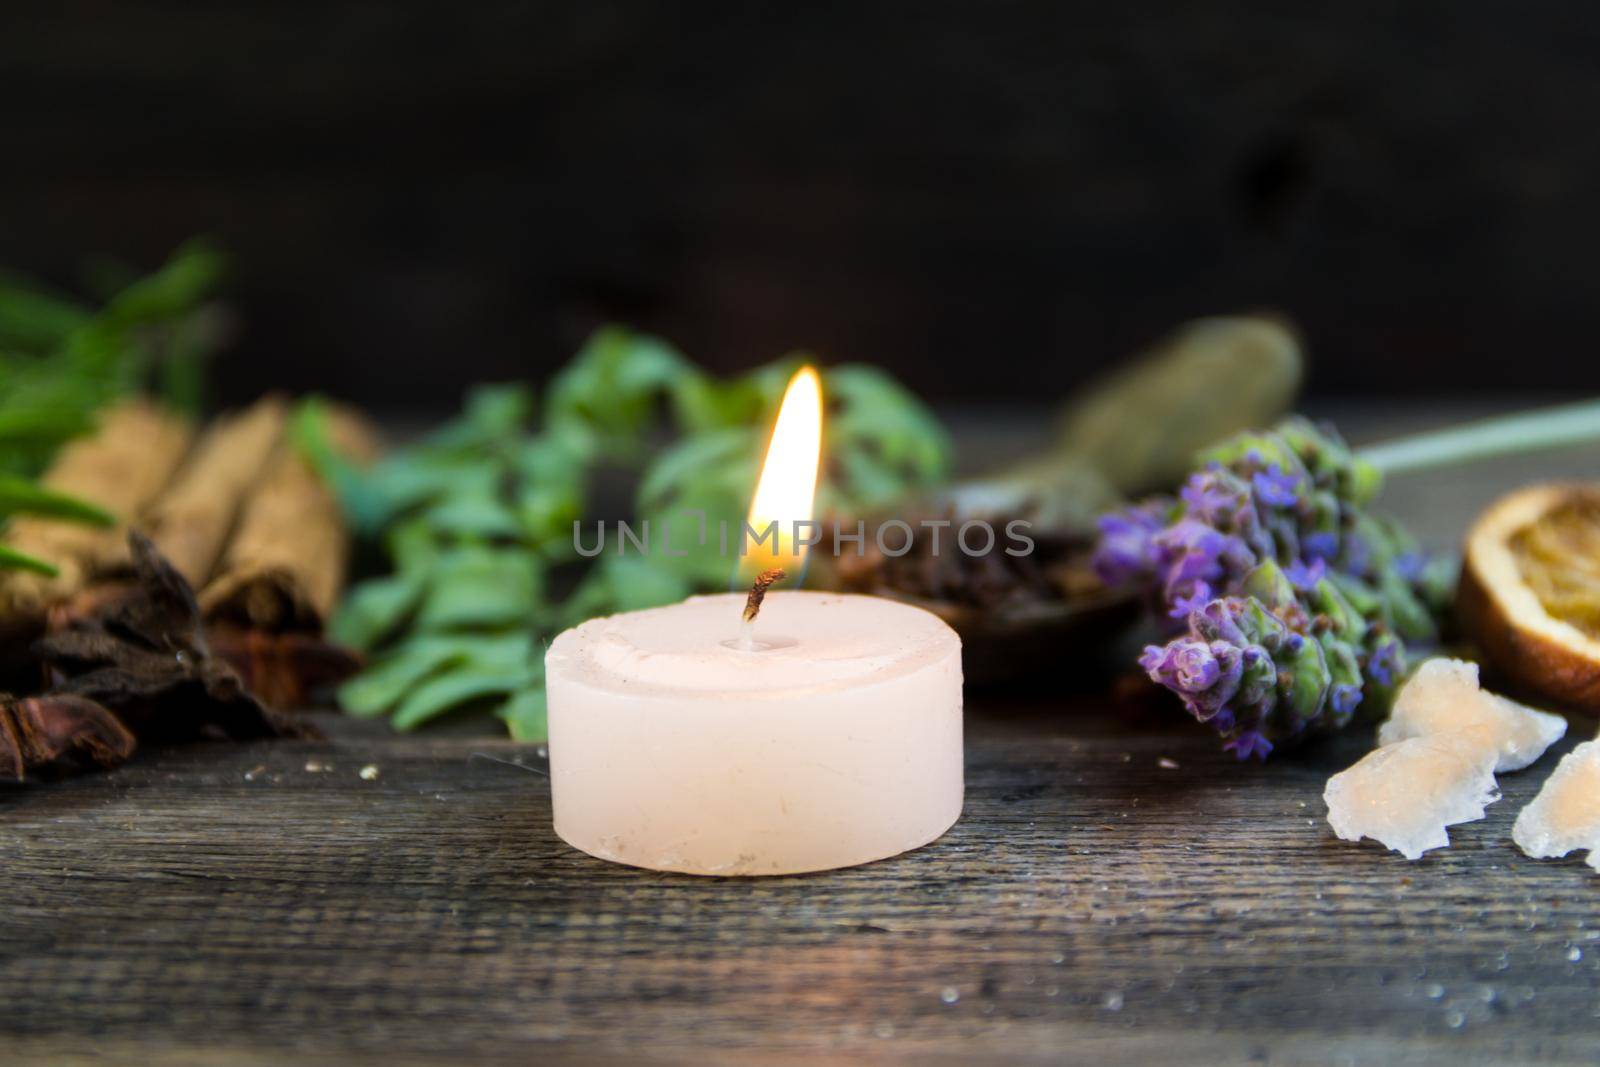 variety of flowers, herbs, candles and essences for aromatherapy, on rustic wood by GabrielaBertolini